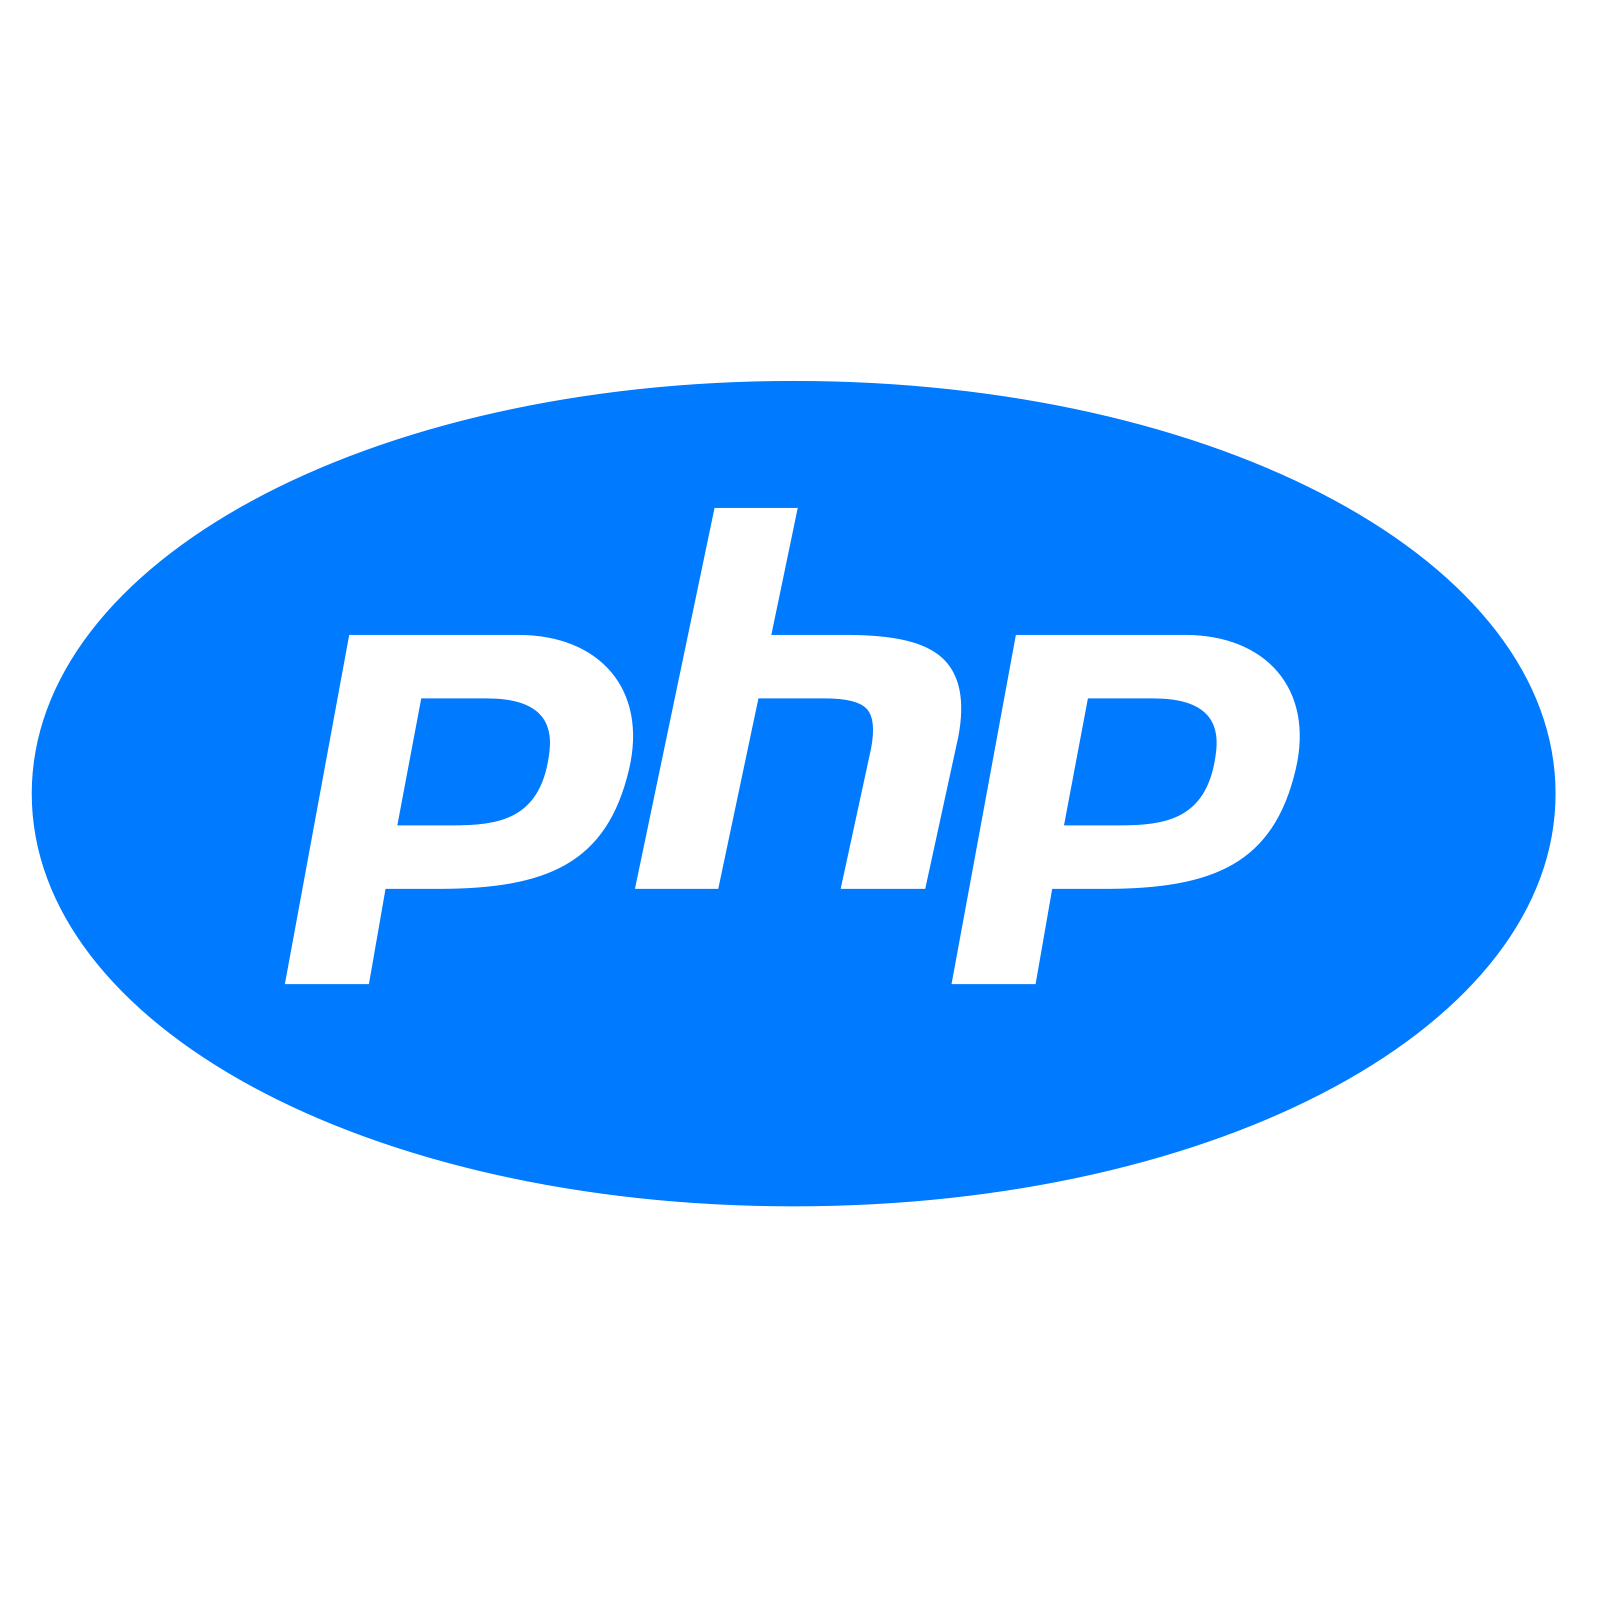  PHP Computer Icons Computer Software Android Png Download 1600 1600 